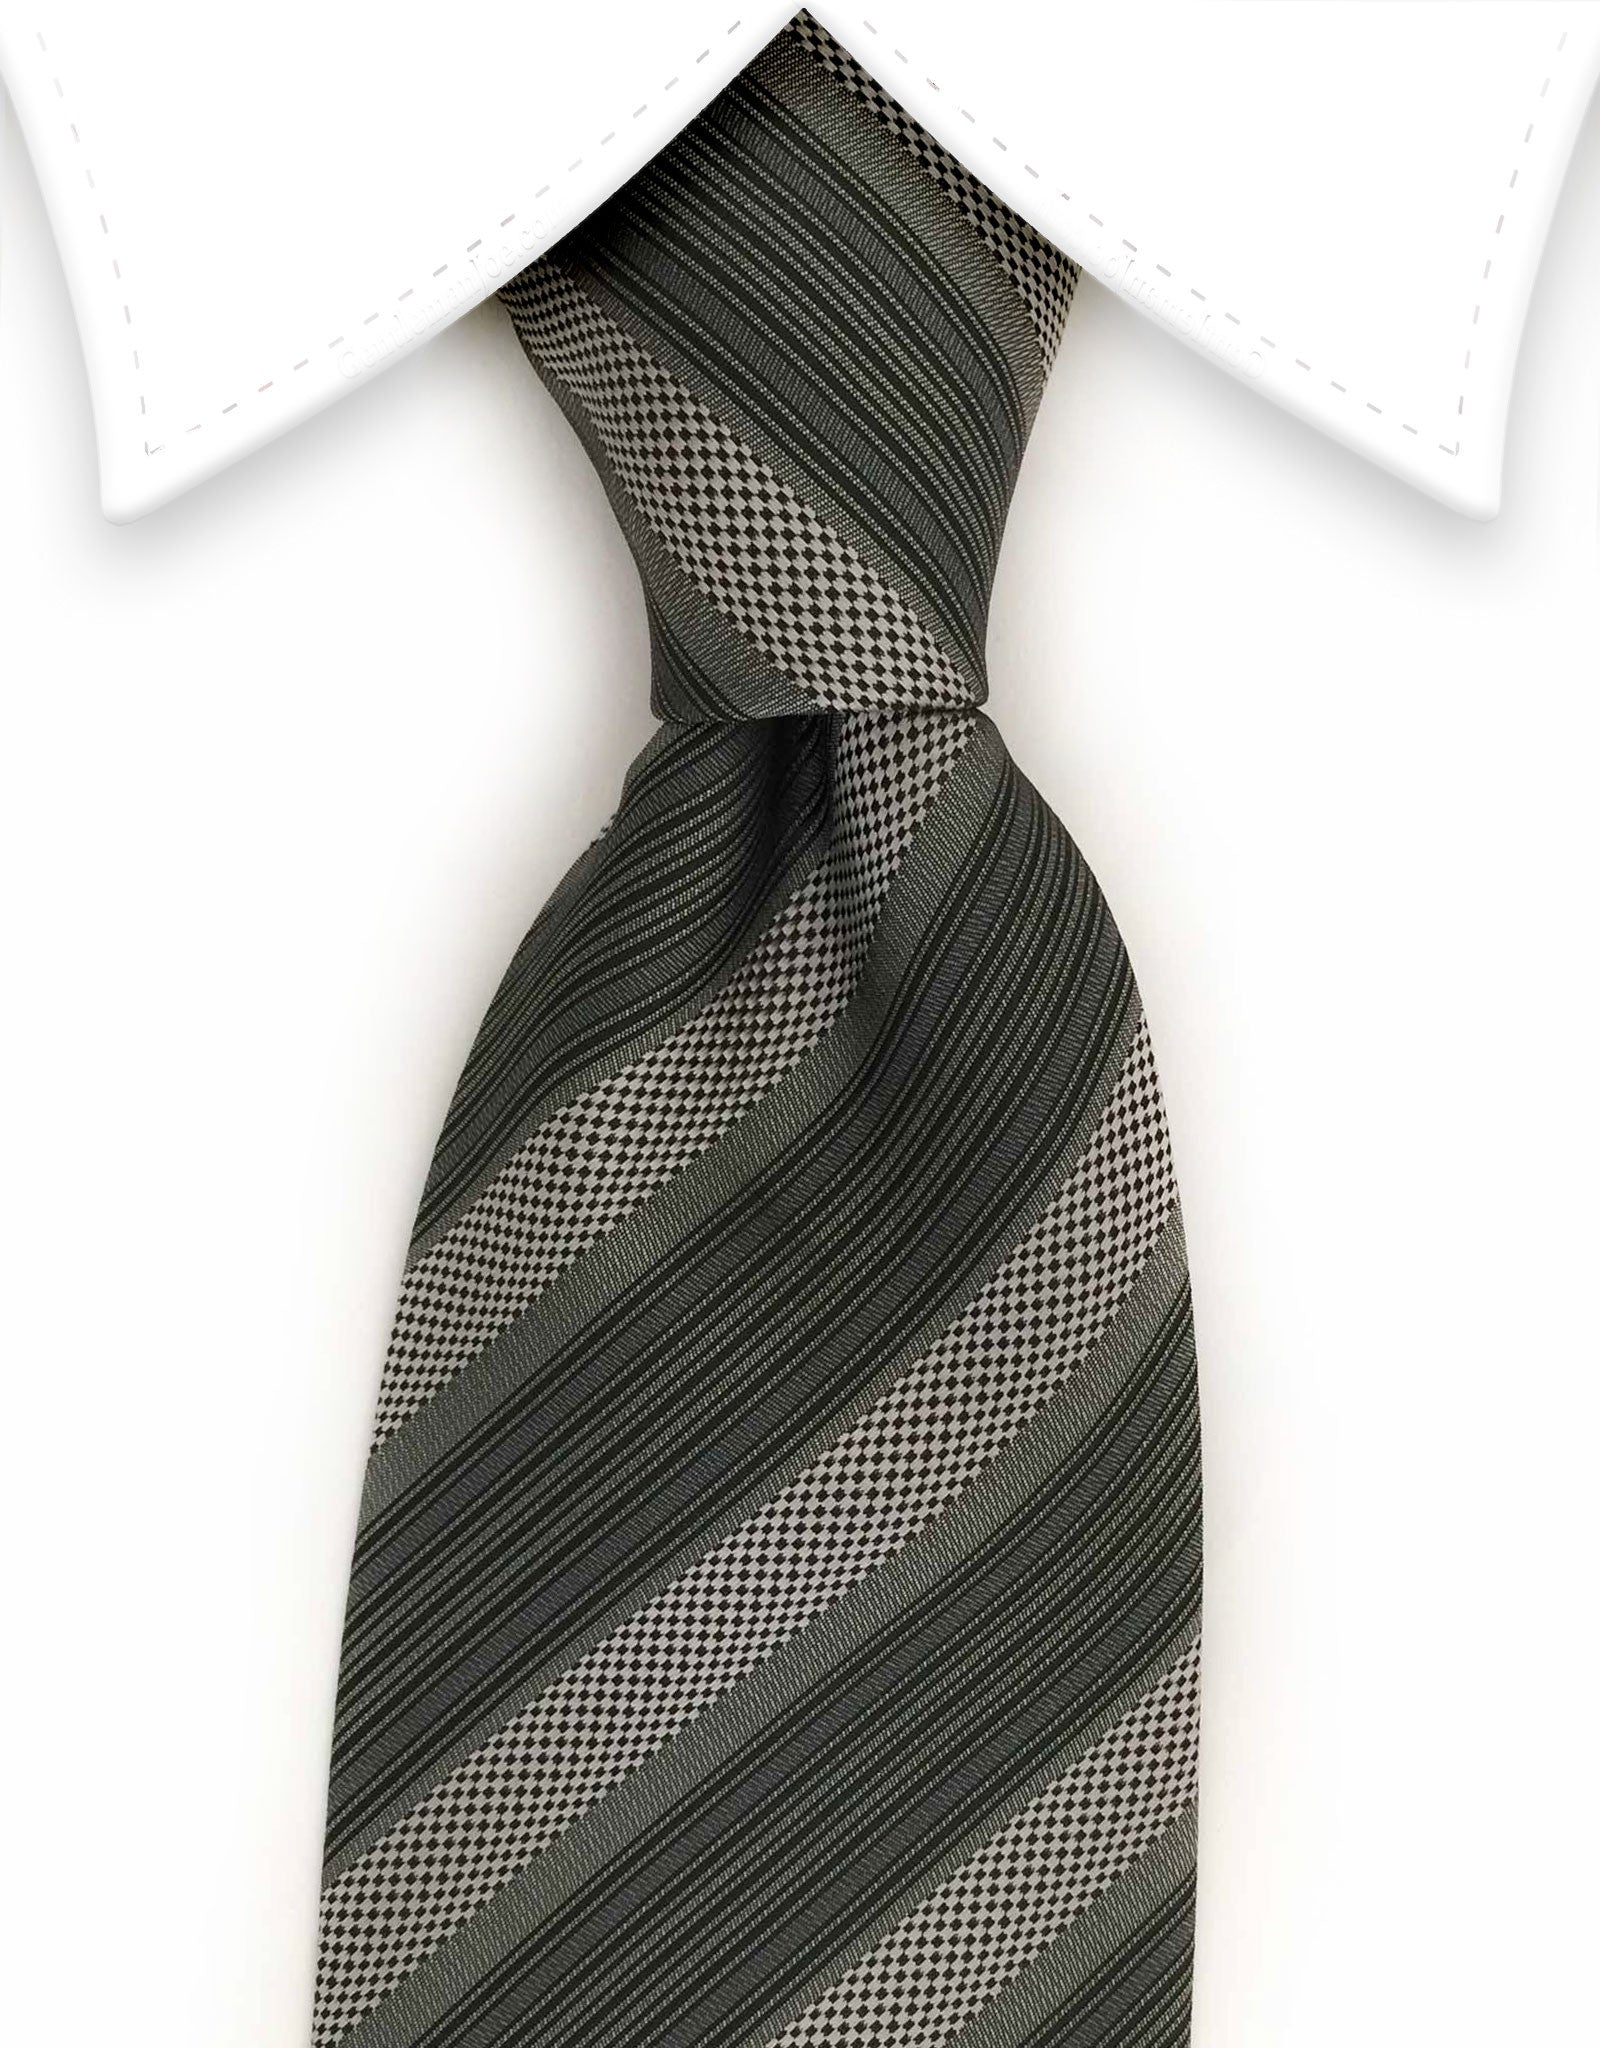 Silver, Gray & Charcoal tie